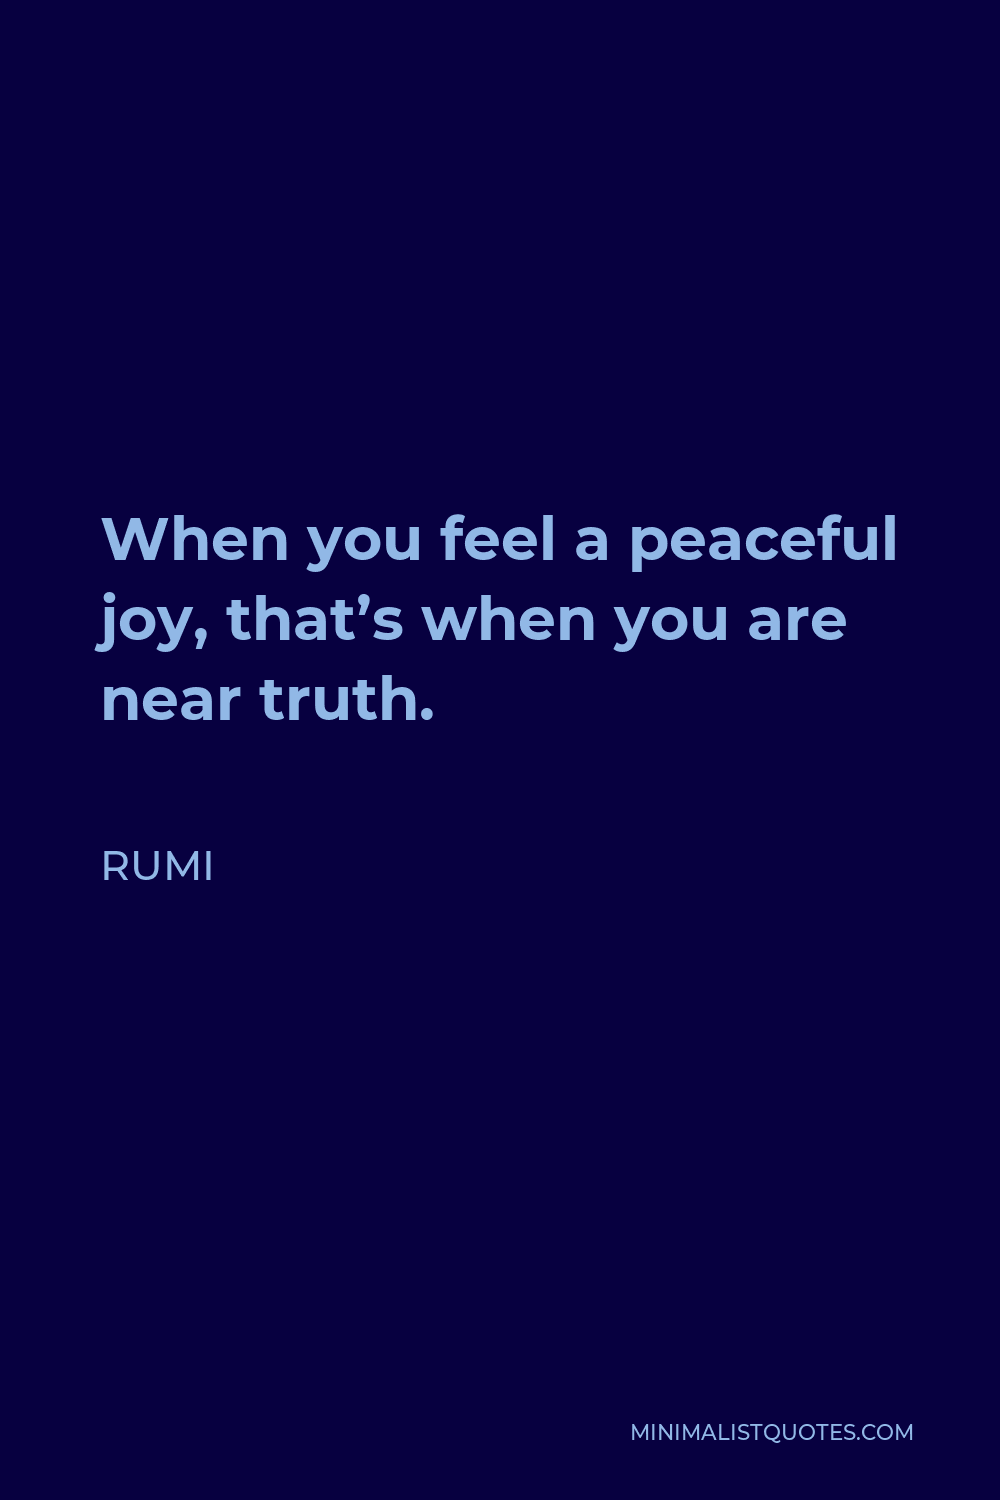 Rumi Quote - When you feel a peaceful joy, that’s when you are near truth.